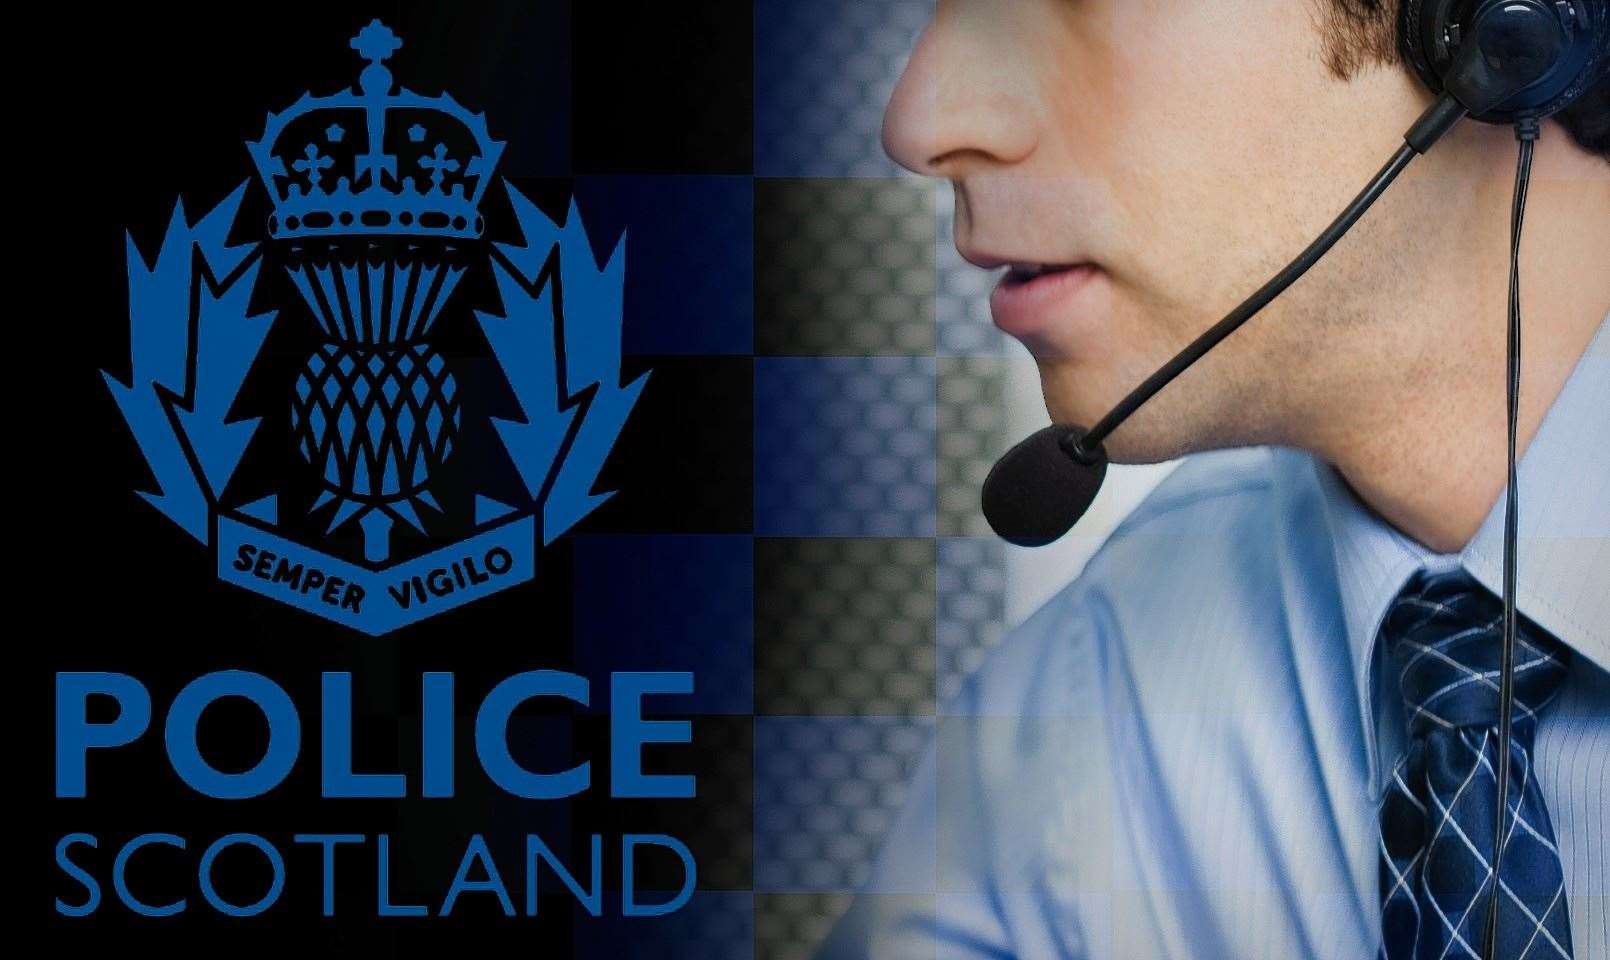 Police Scotland reminds people to only dial 999 for emergencies.